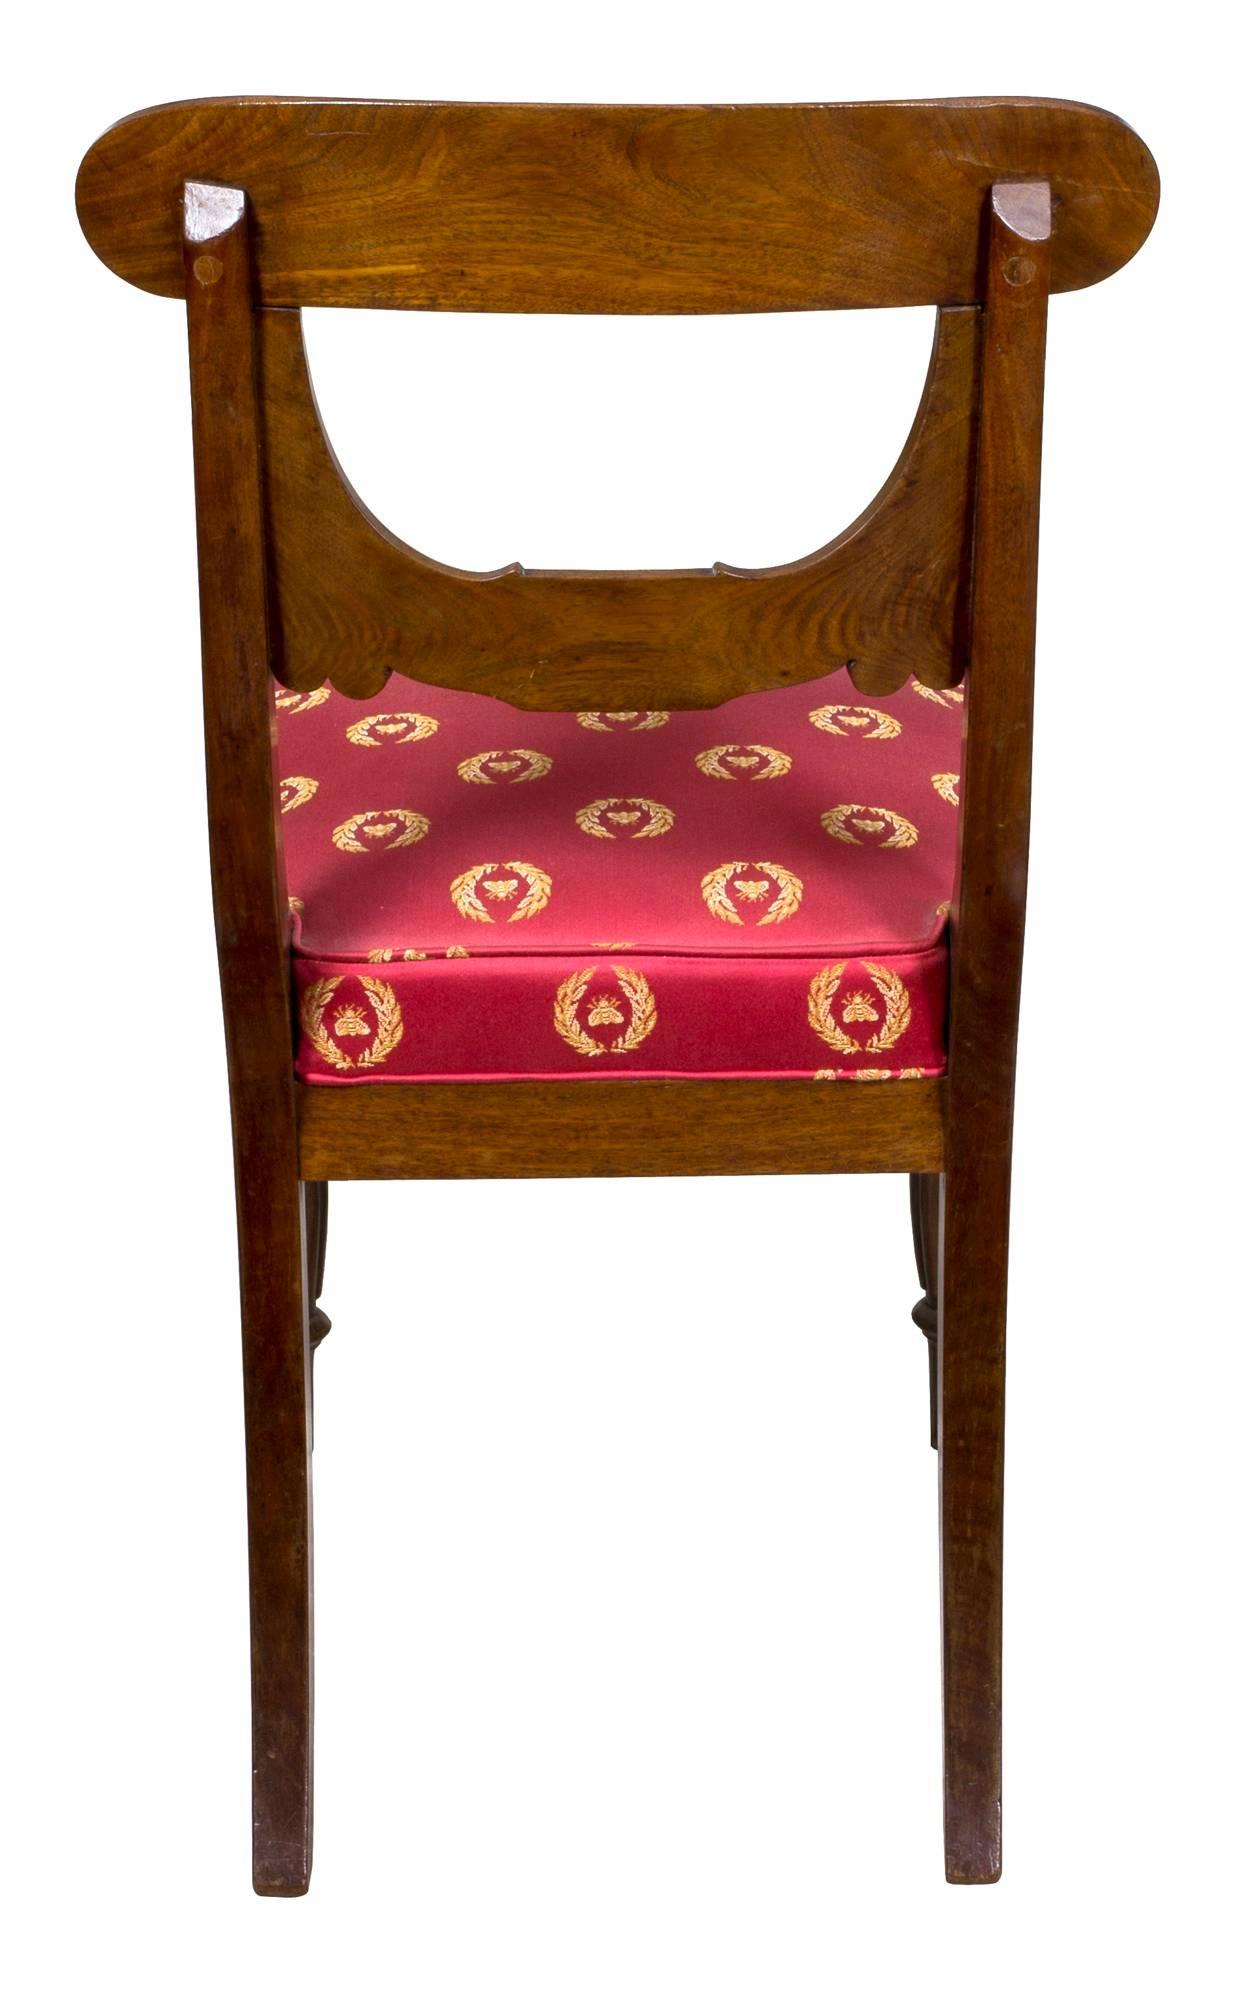 This set of chairs is the only one known with the bulbous reeded front leg and commodious original box seats, which make for a most comfortable and sturdy dining room chair. 

The main stylistic theme is the stylized drapery type backsplat which